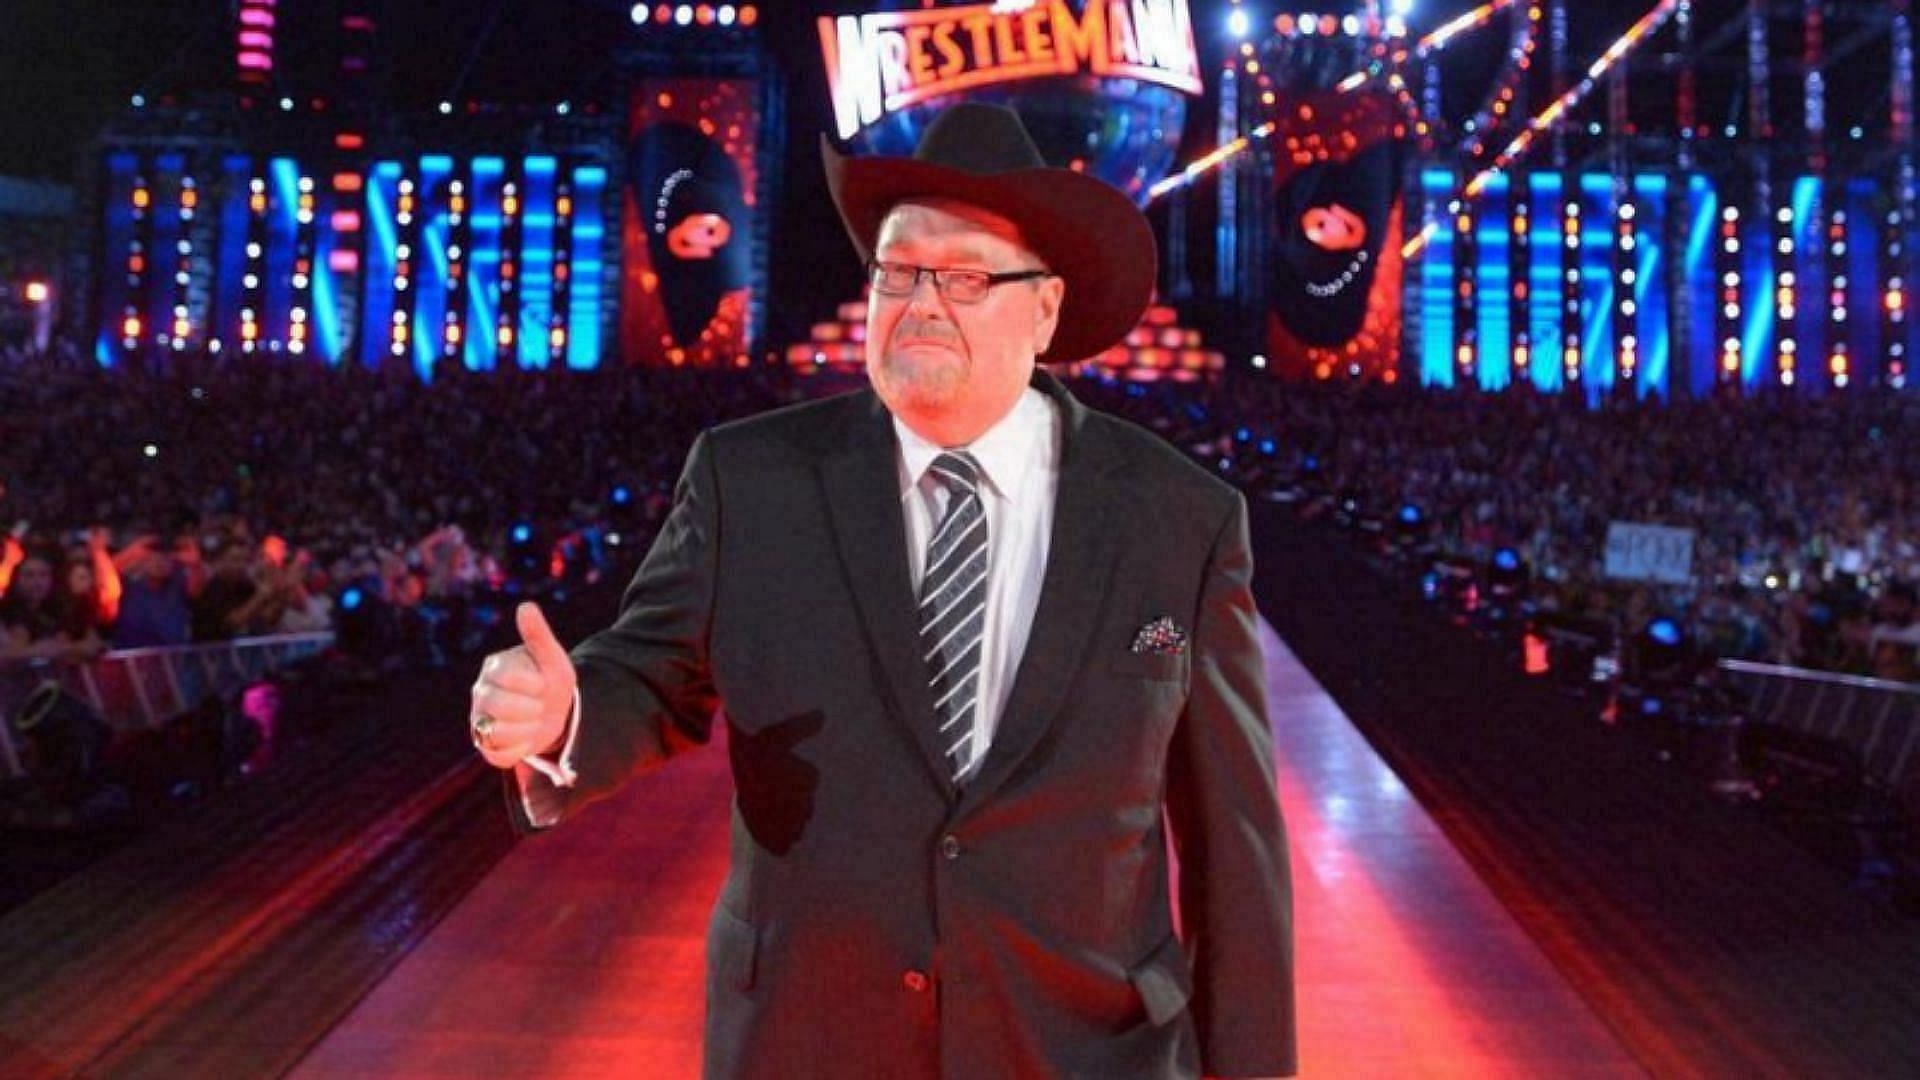 Former WWE commentator and current AEW announcer Jim Ross